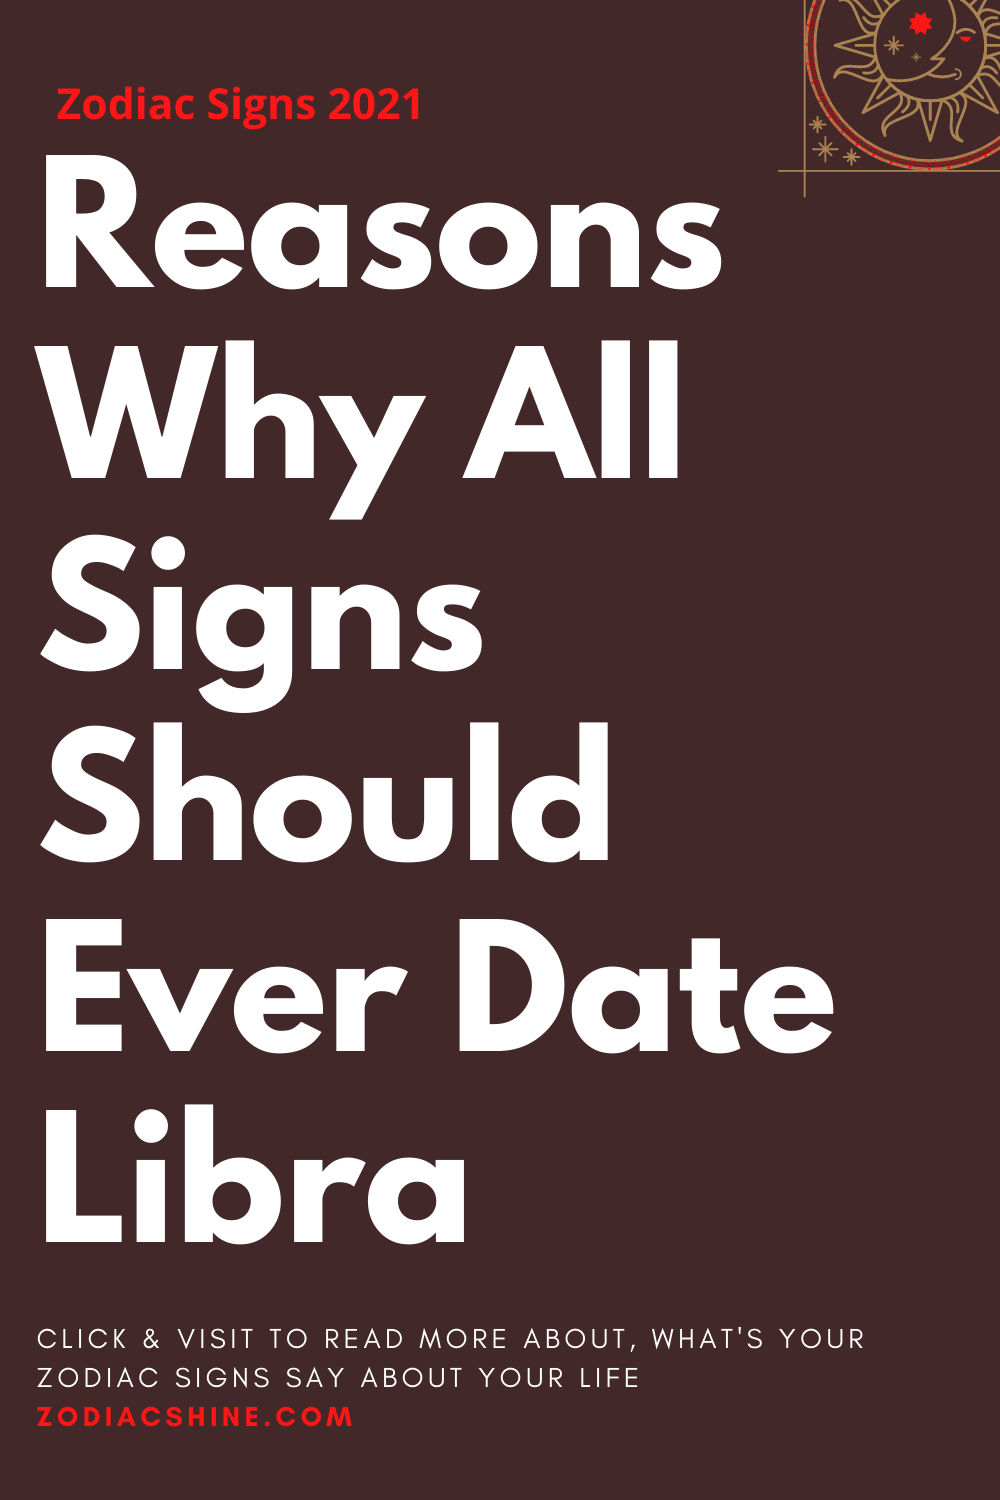 Reasons Why All Signs Should Ever Date Libra